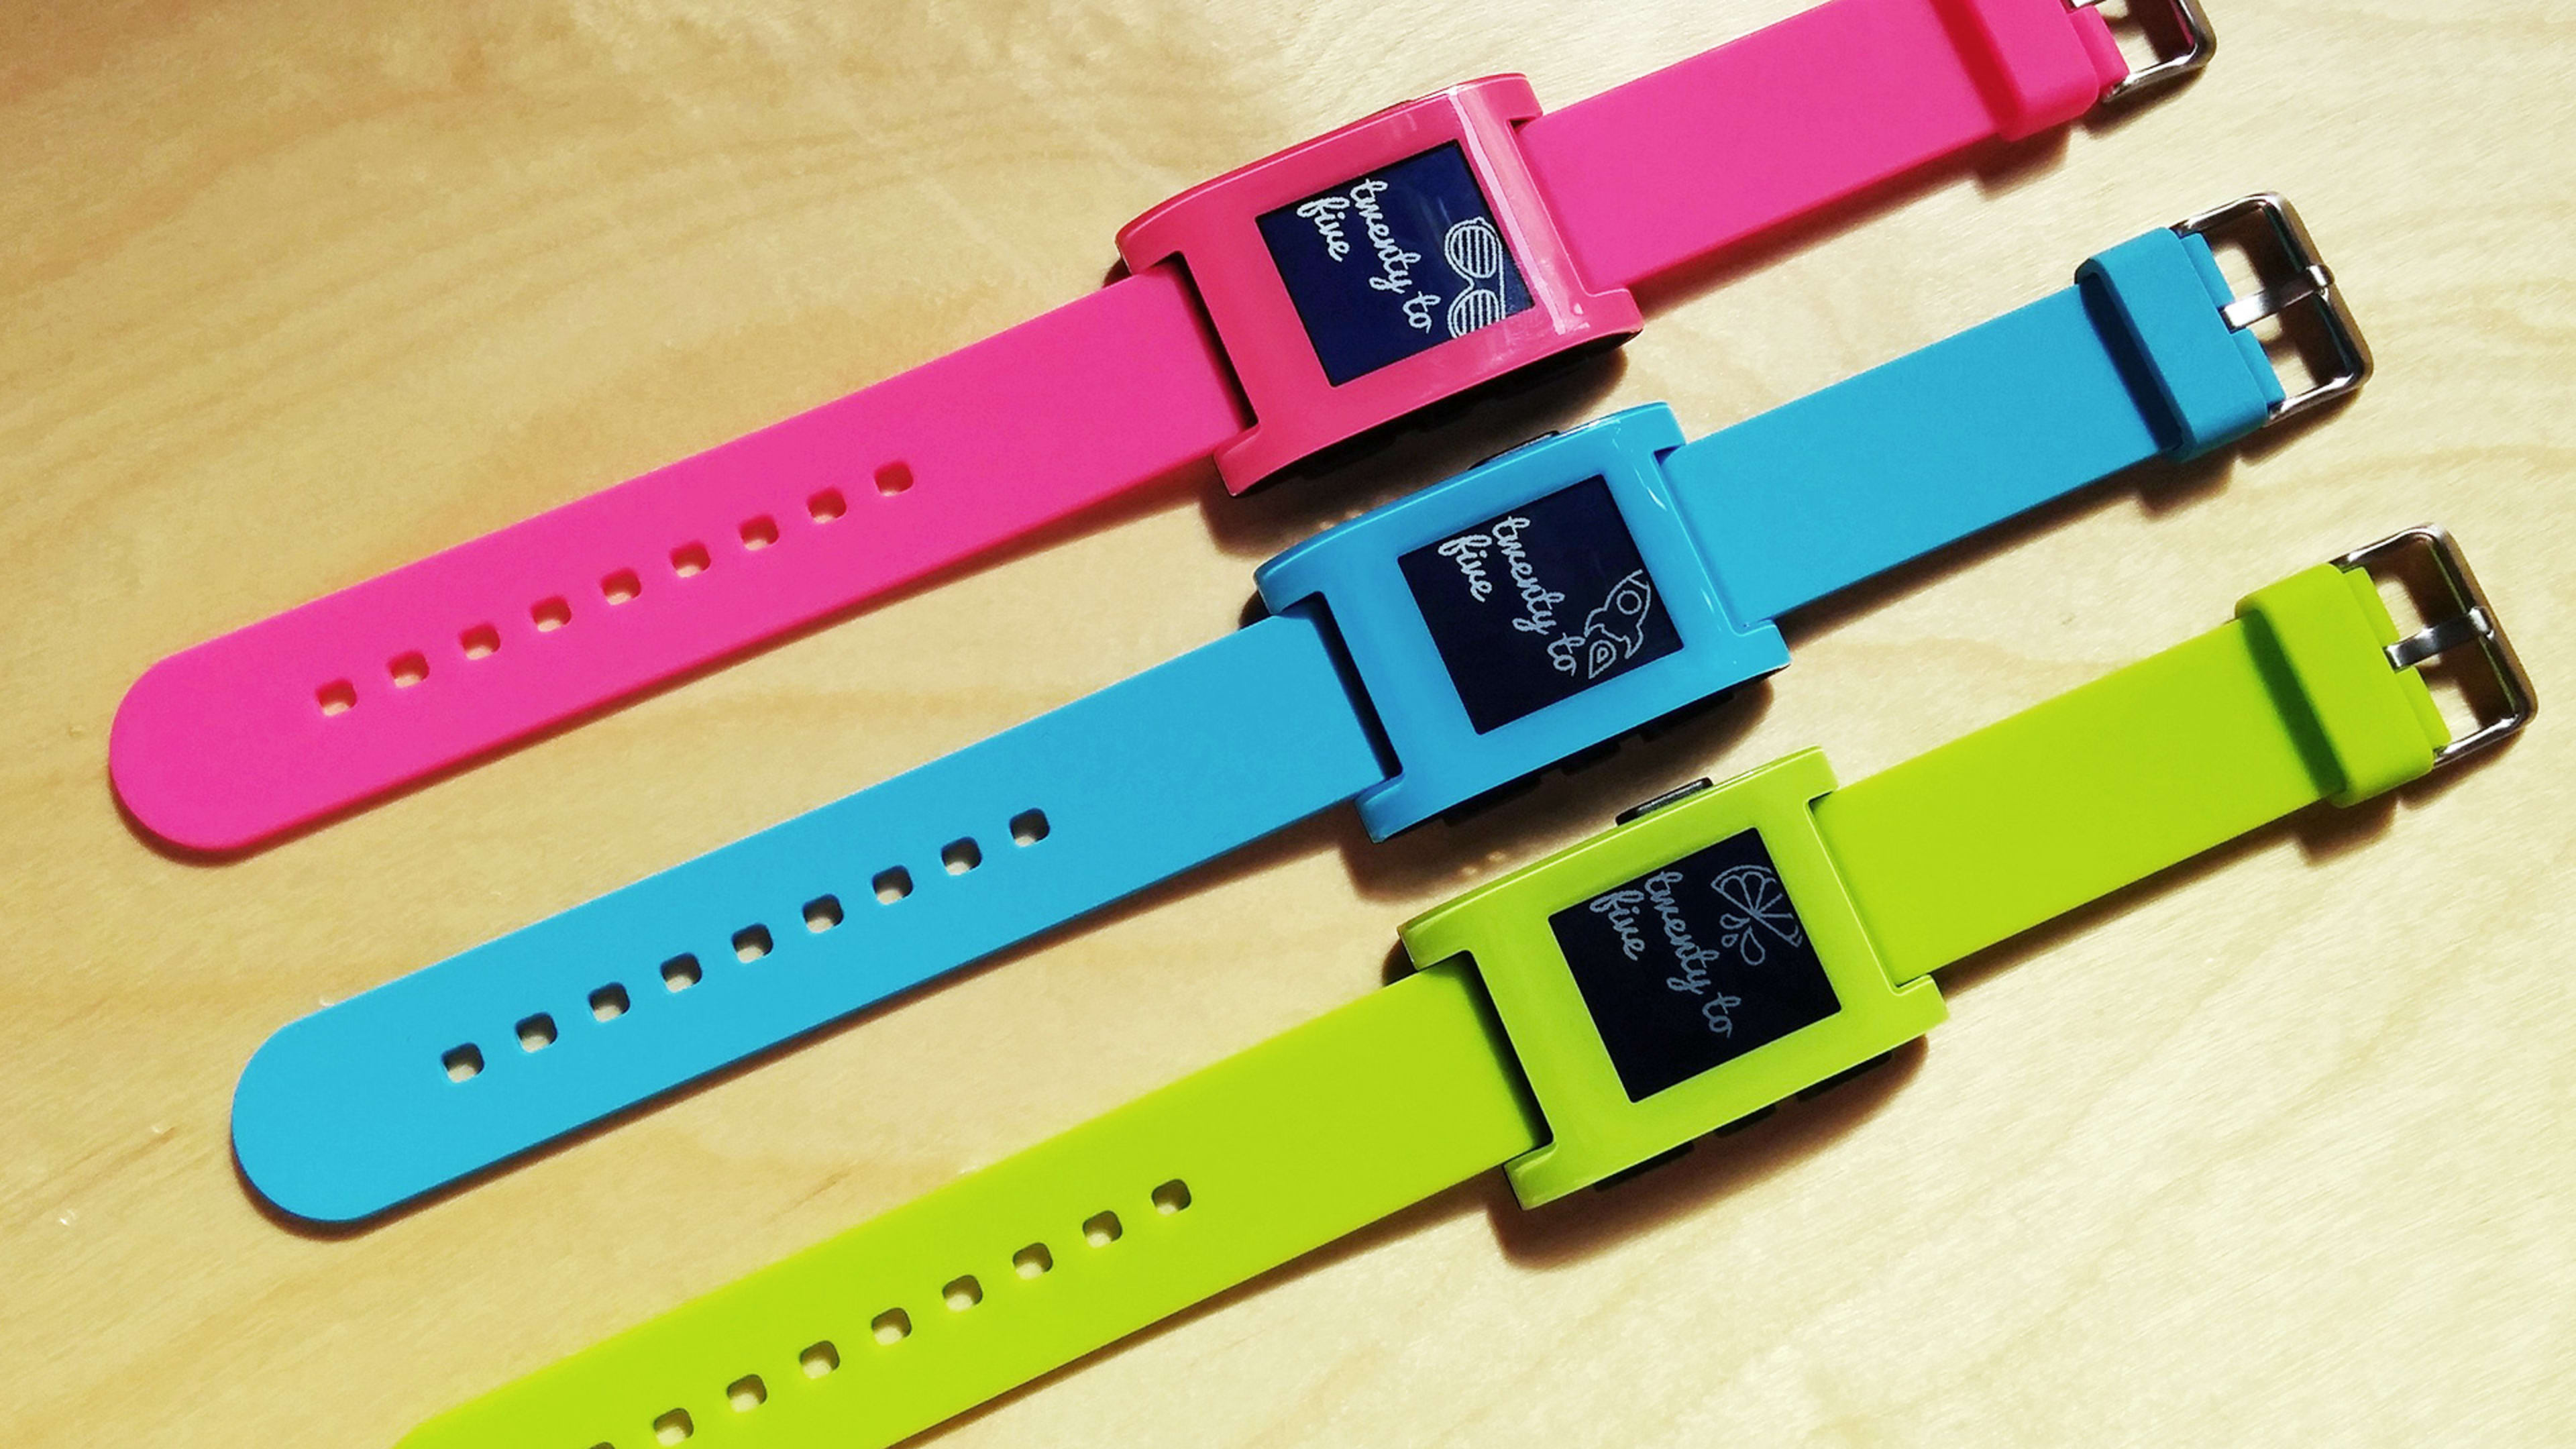 Pebble’s Smartwatch Adds More Color Choices